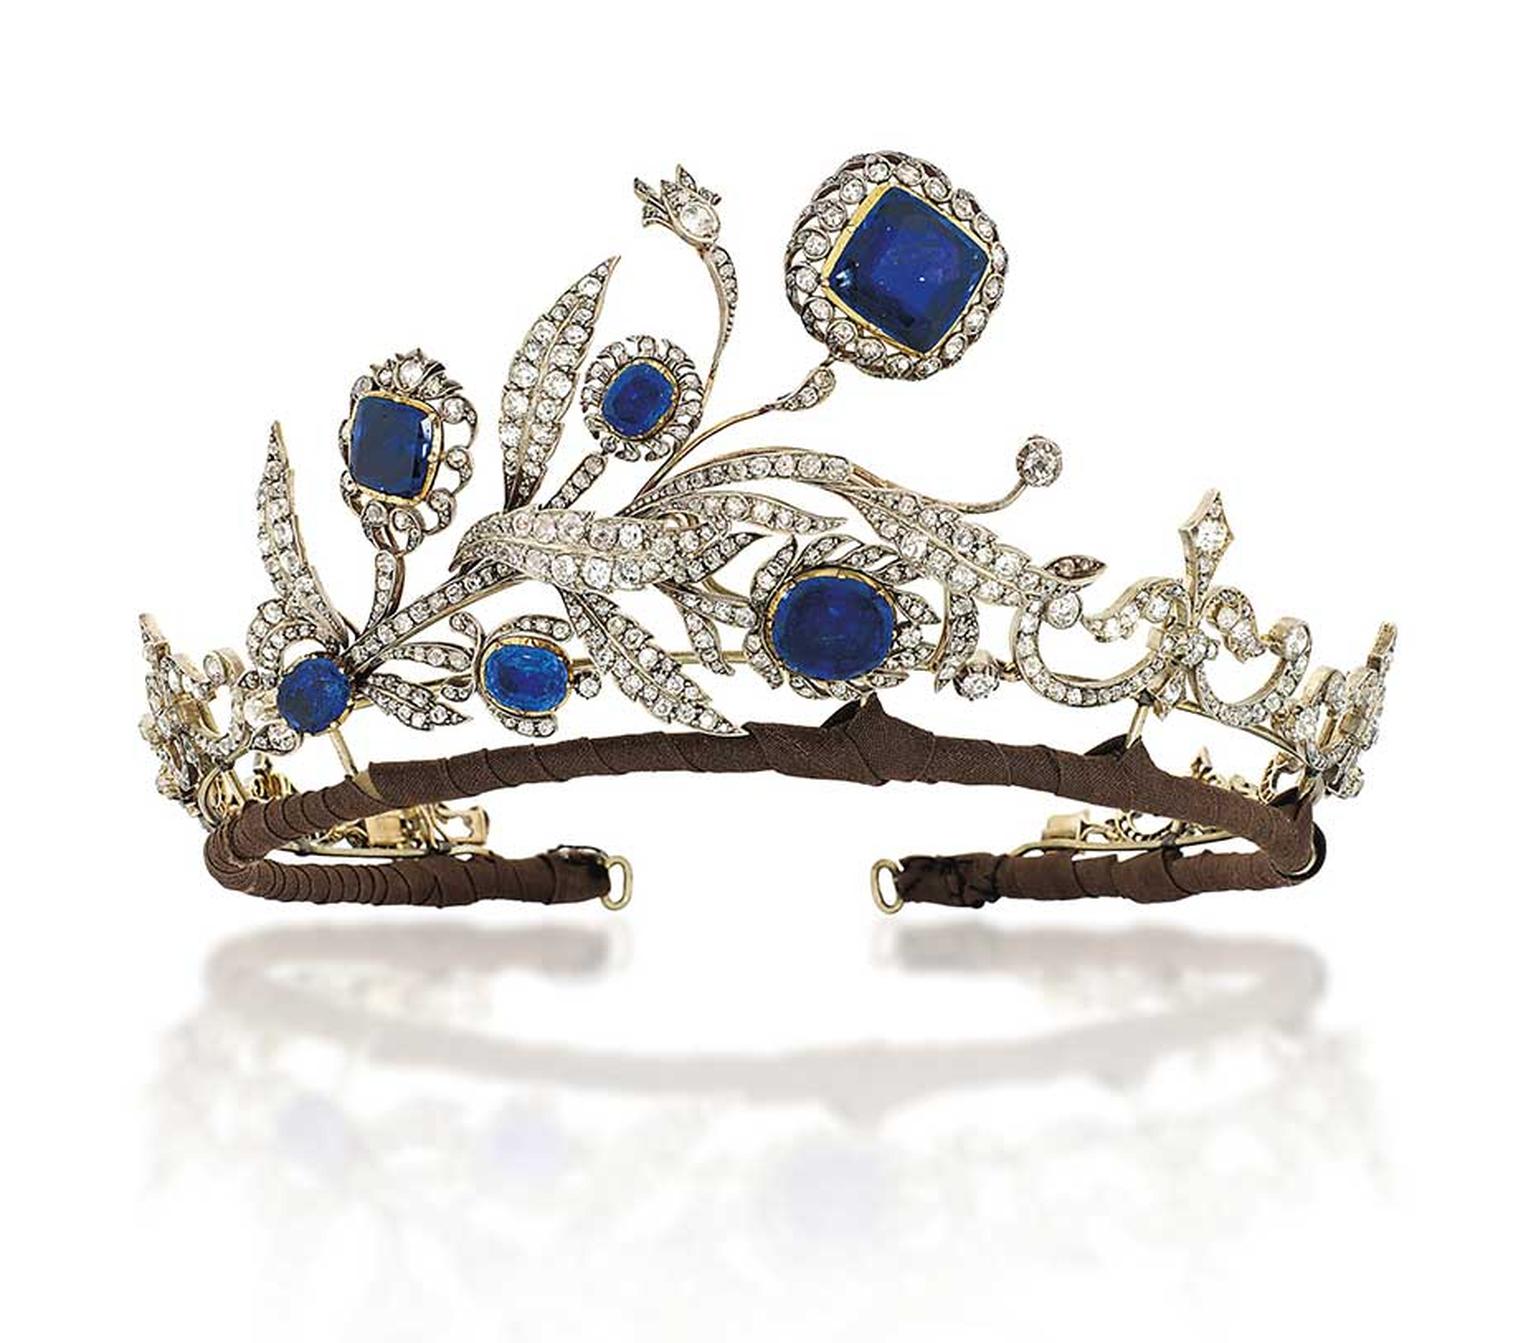 Lot 248, a sapphire and diamond tiara dating from 1890, is regal yet delicate (estimate: £30,000-40,000). Christie's Important Jewels Sale on 26 November at King Street in London.